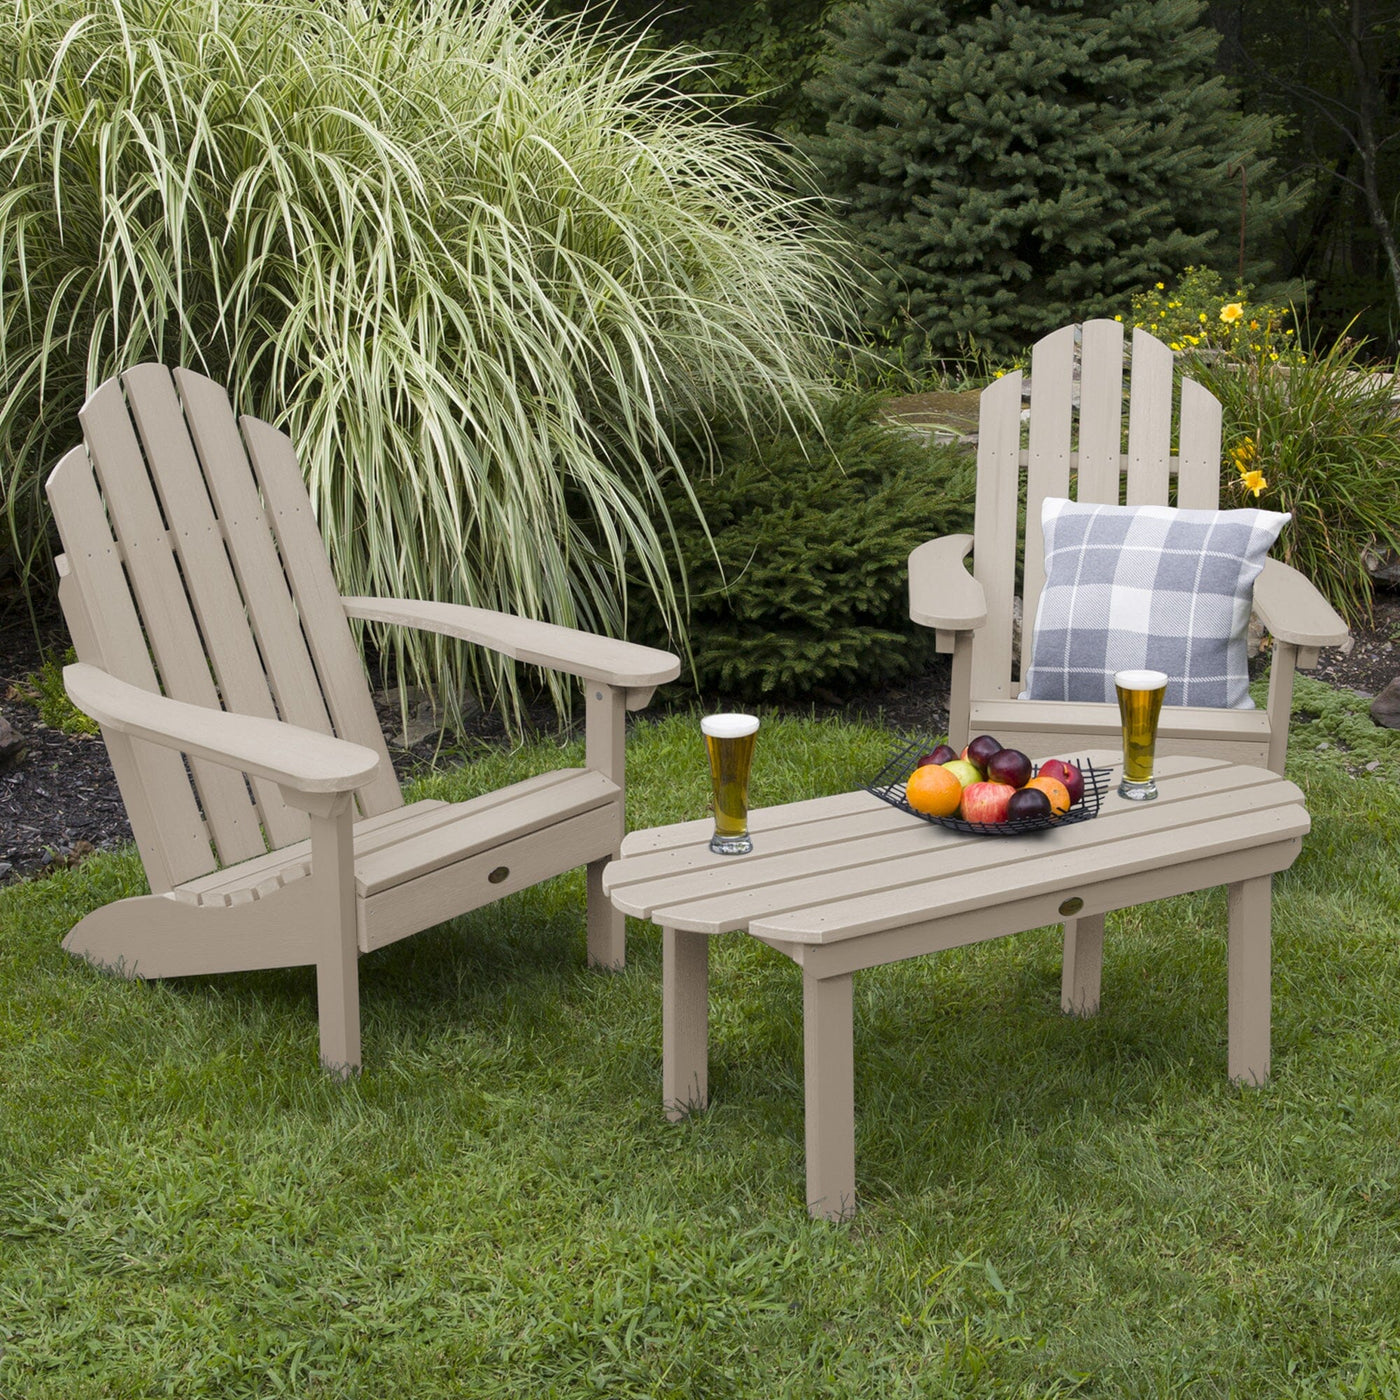 2 Westport Adirondack Chairs with 1 Westport Conversation Table Kitted Sets Highwood USA 